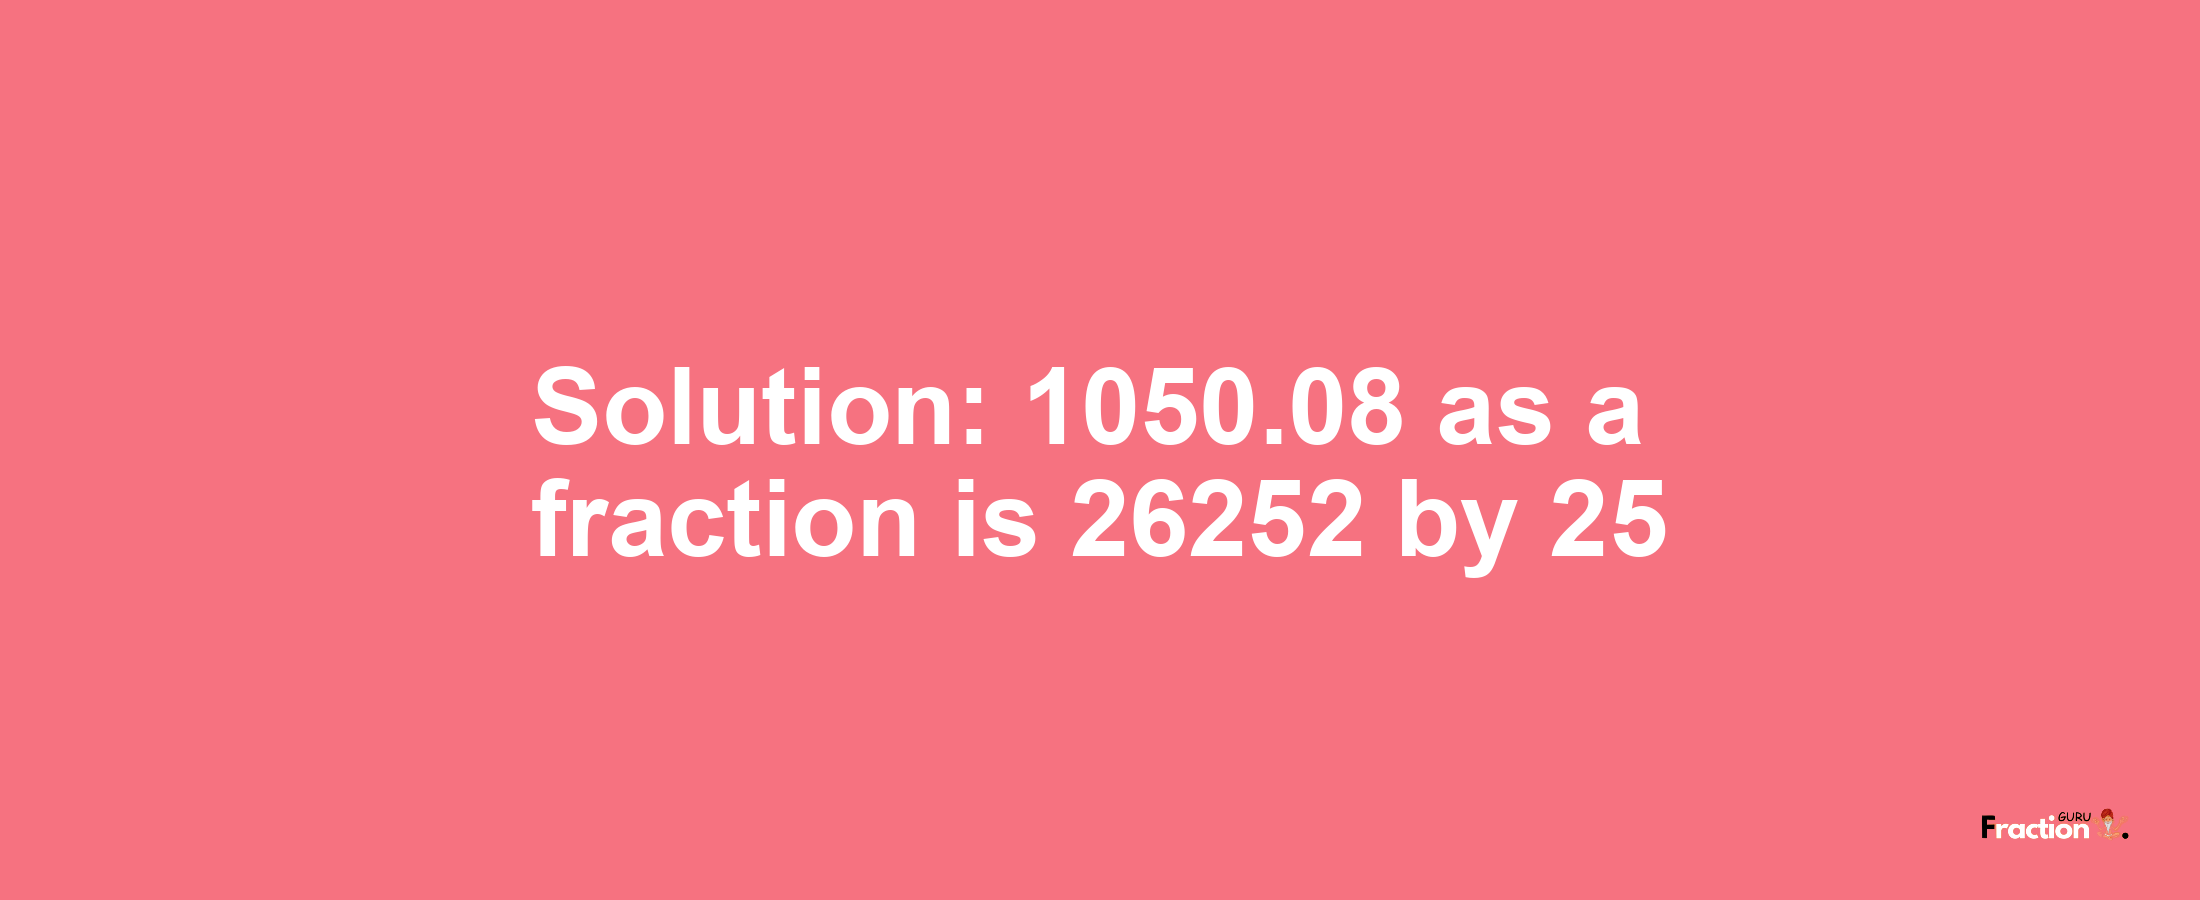 Solution:1050.08 as a fraction is 26252/25